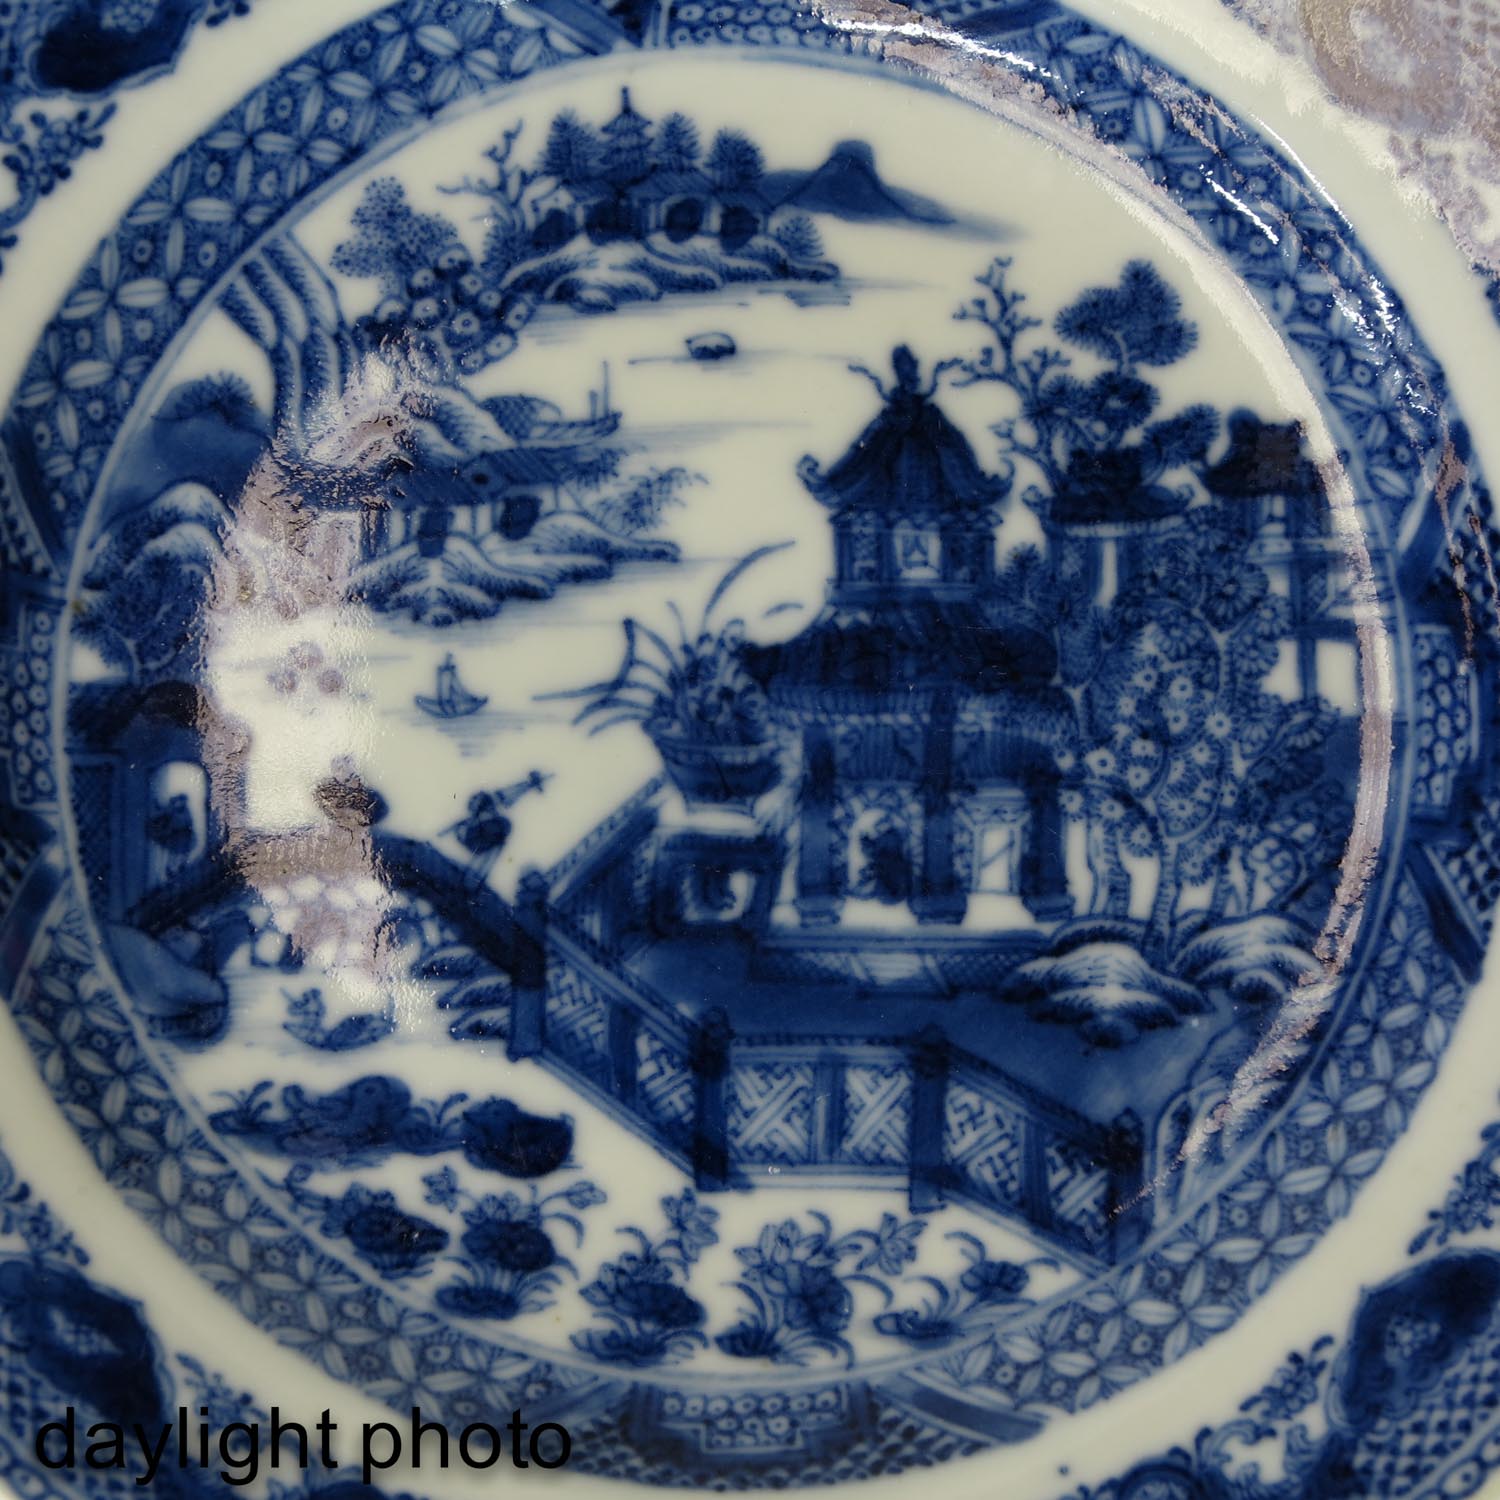 A Series of 5 Blue and White Plates - Image 9 of 9